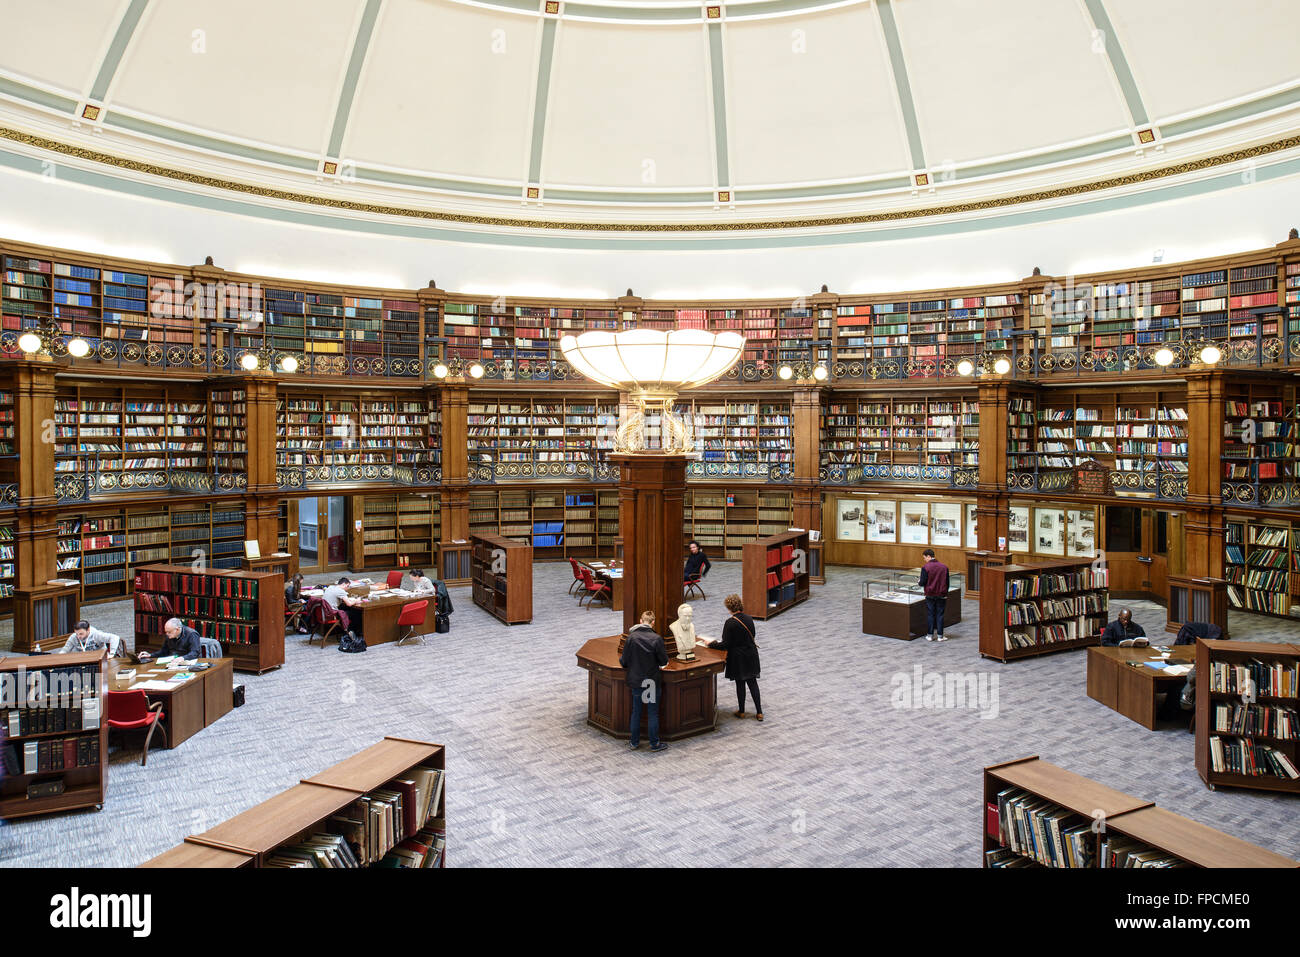 An interior view of the old Liverpool Library, showing the more traditional decor and style compared to the new more modern replacement. Stock Photo